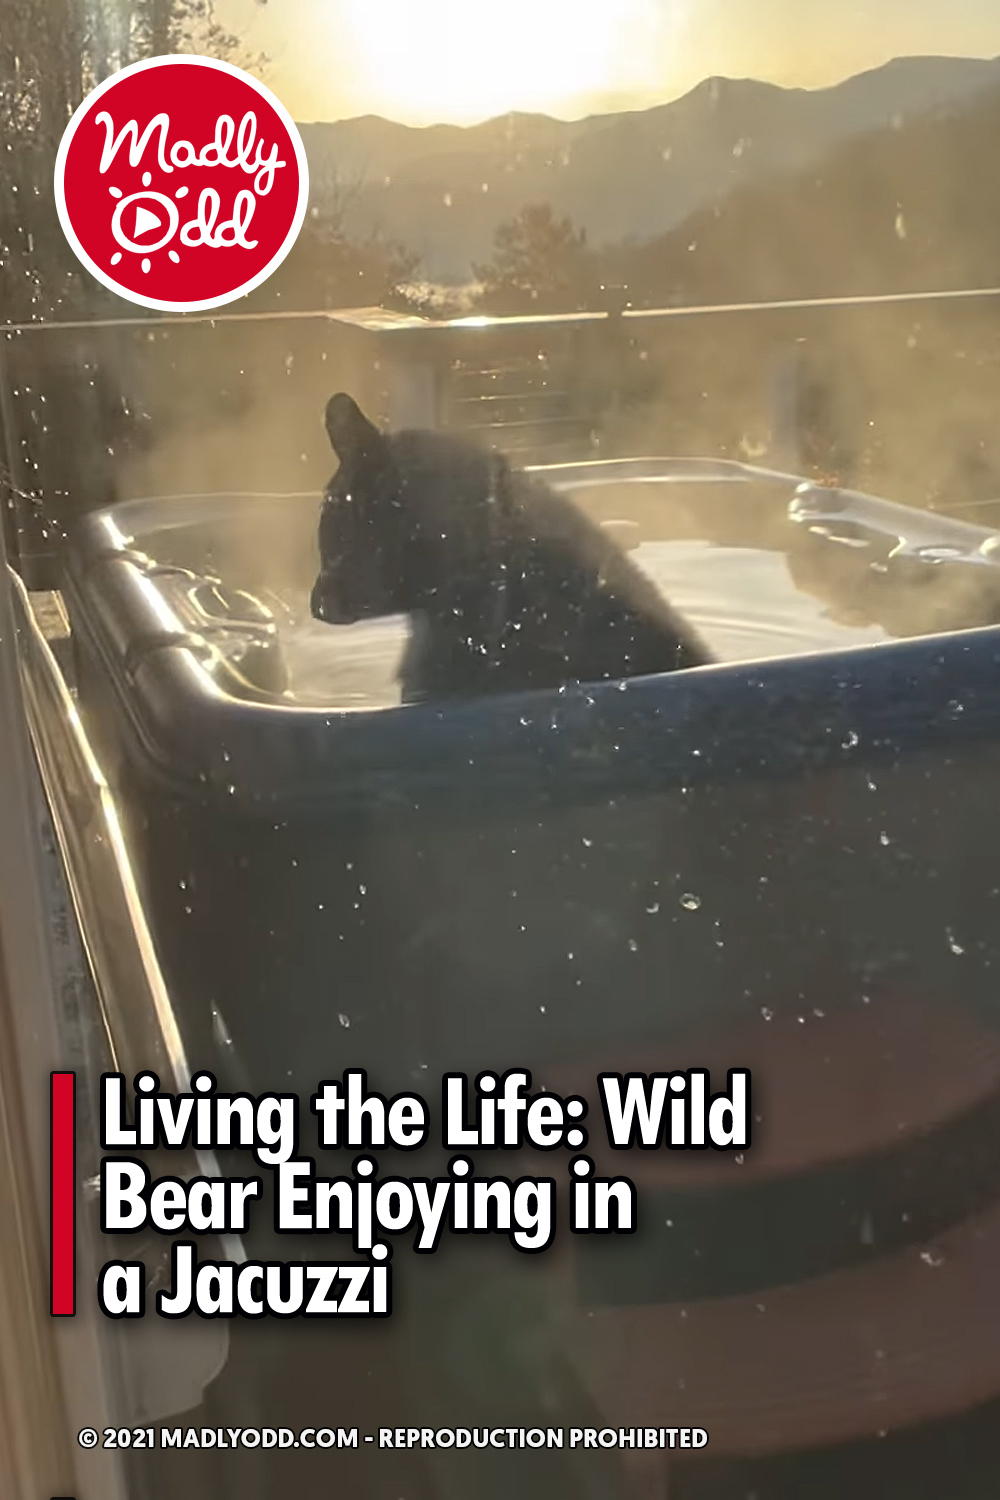 Living the Life: Wild Bear Enjoying in a Jacuzzi